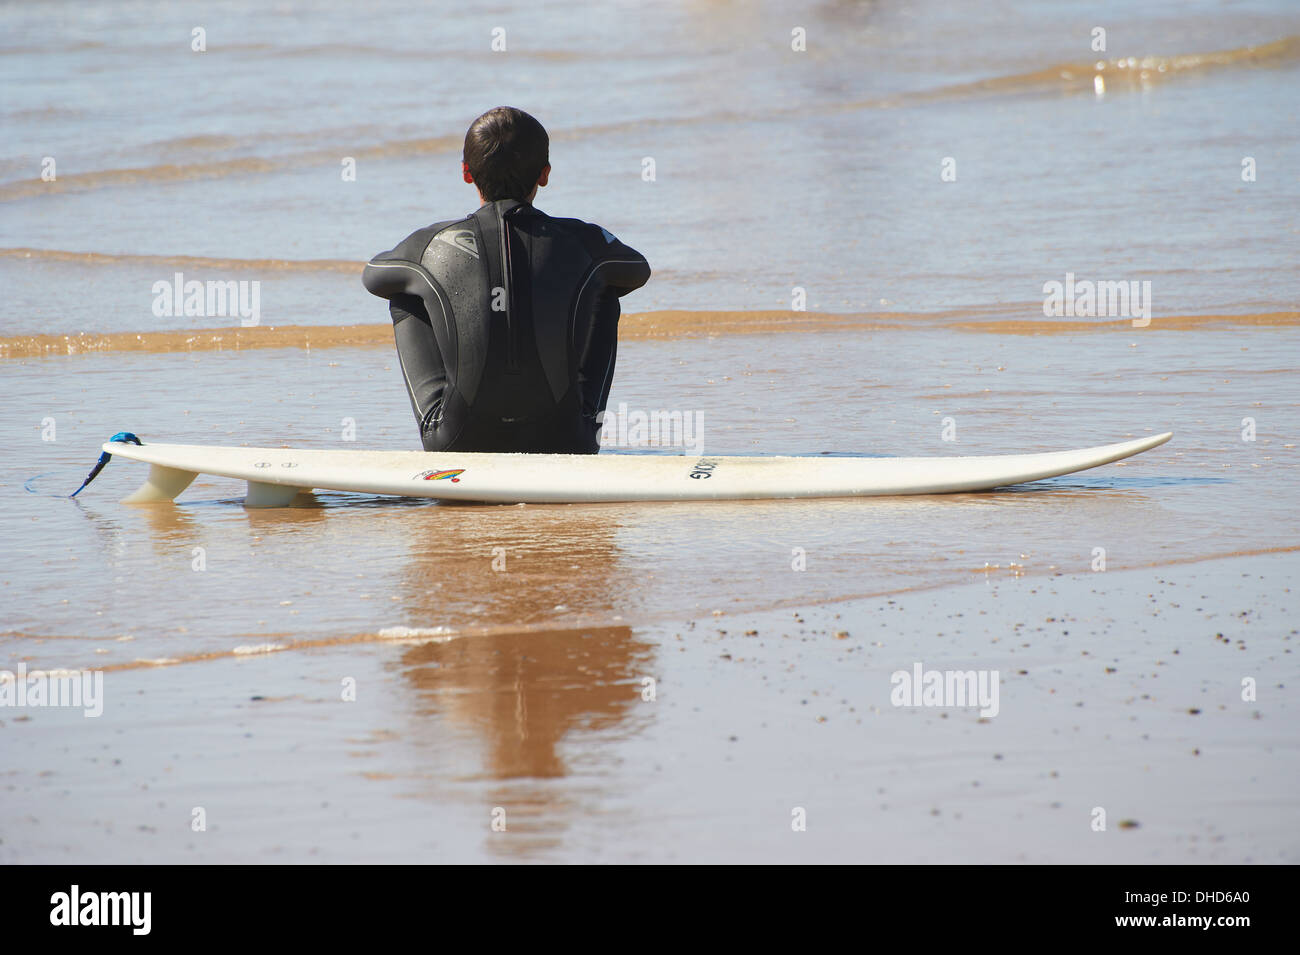 Surfer sitting on the beach by his board Stock Photo